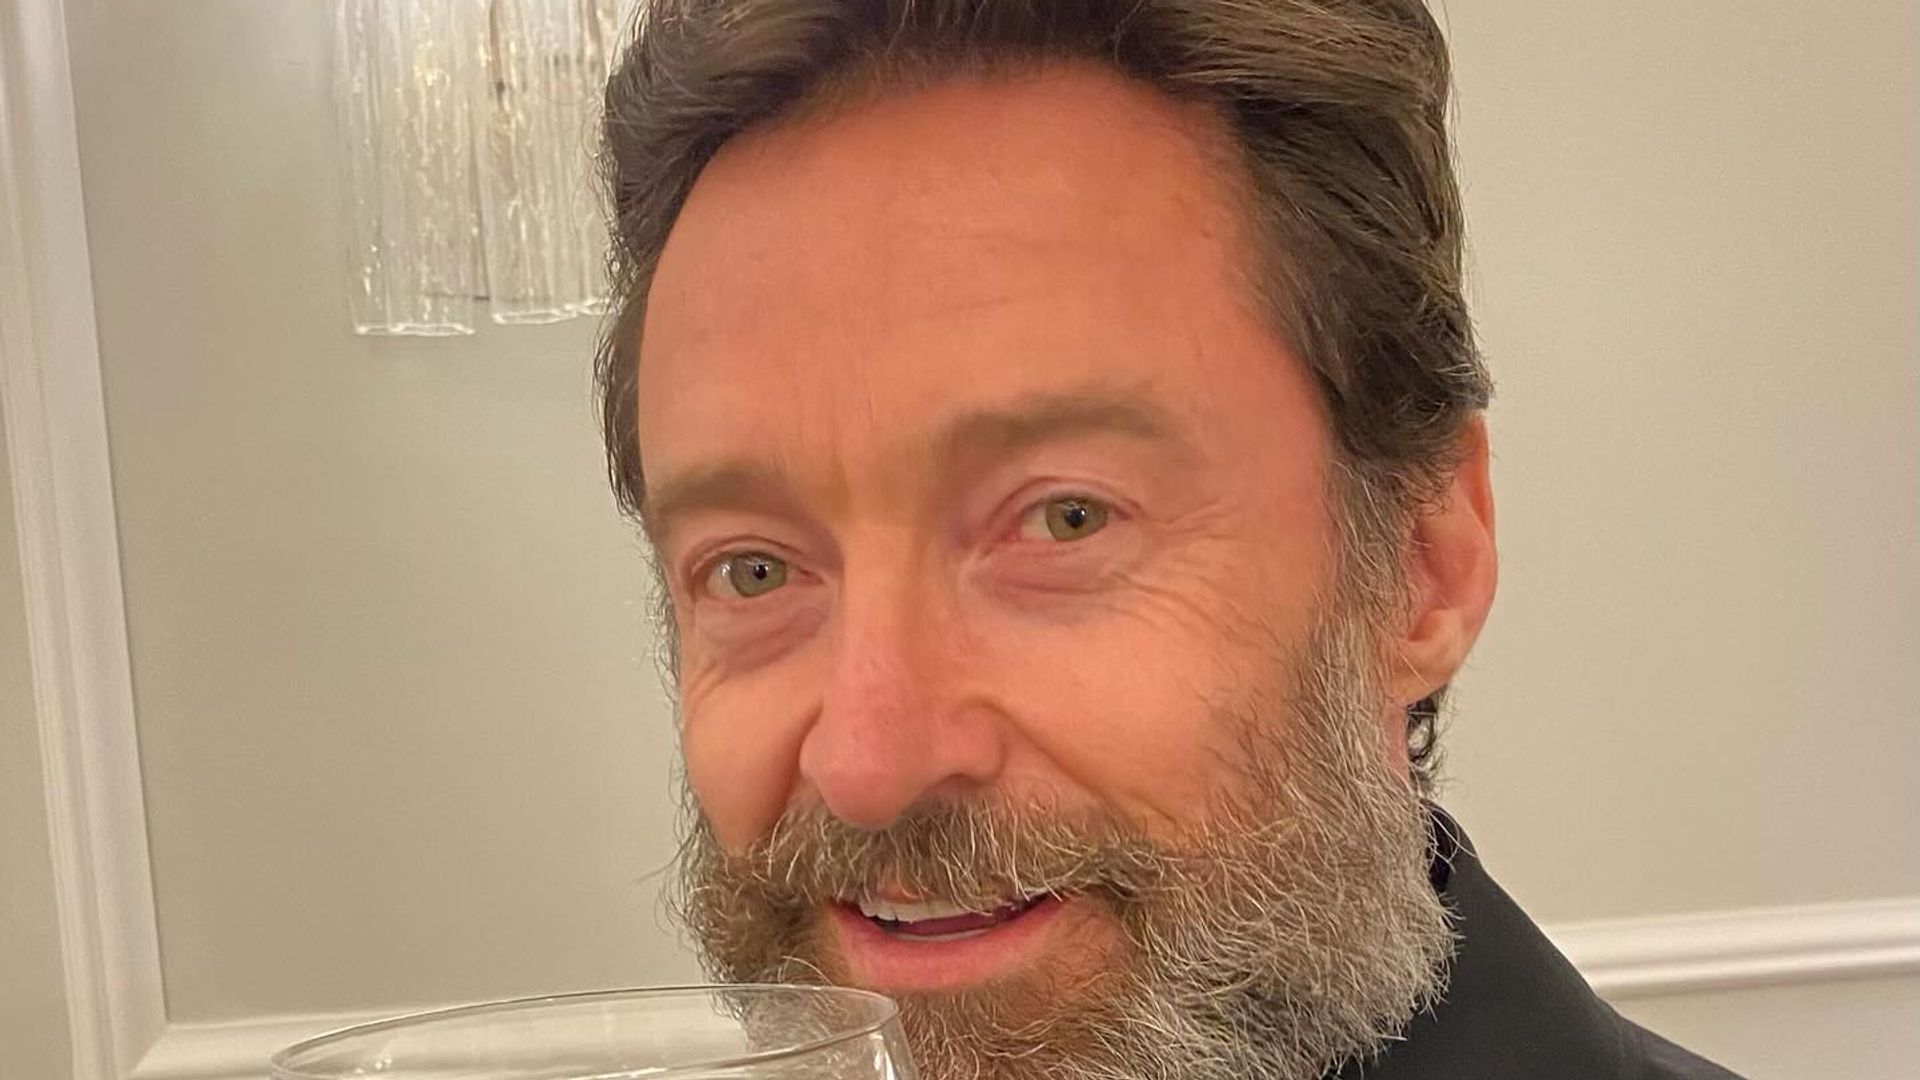 Hugh Jackman celebrated his first Christmas since his separation from Deborra-Lee Furness